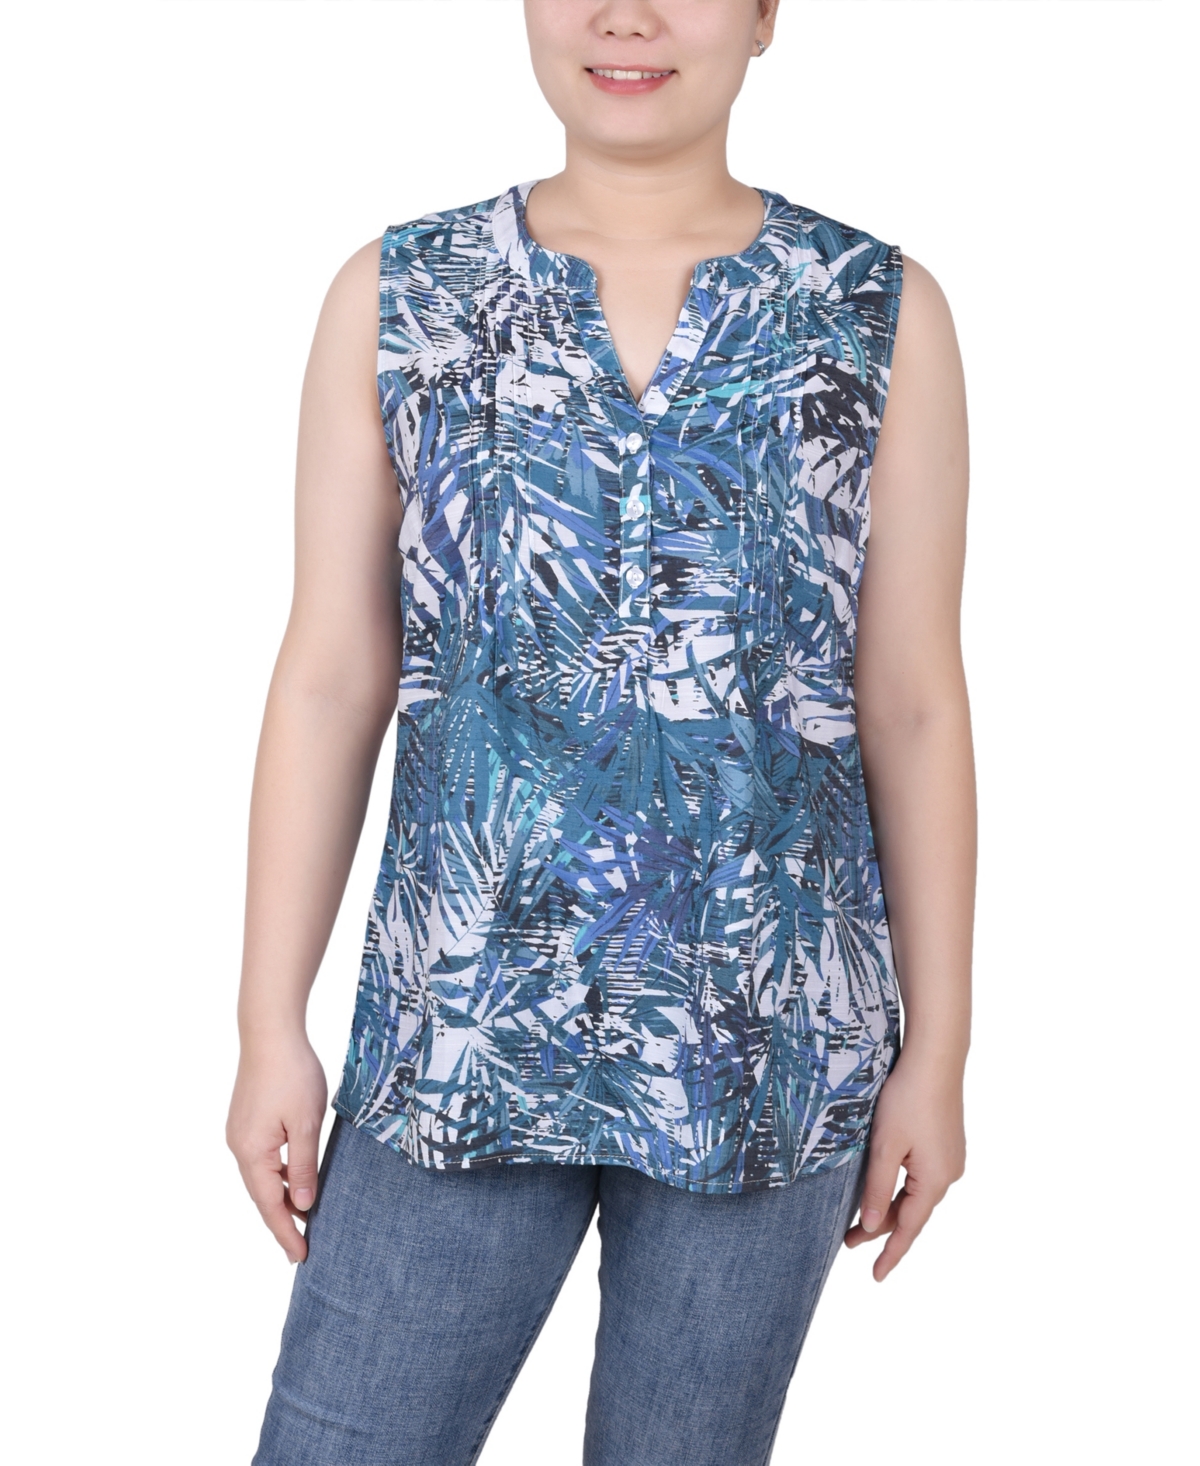 NY COLLECTION WOMEN'S SLEEVELESS PINTUCKED BLOUSE